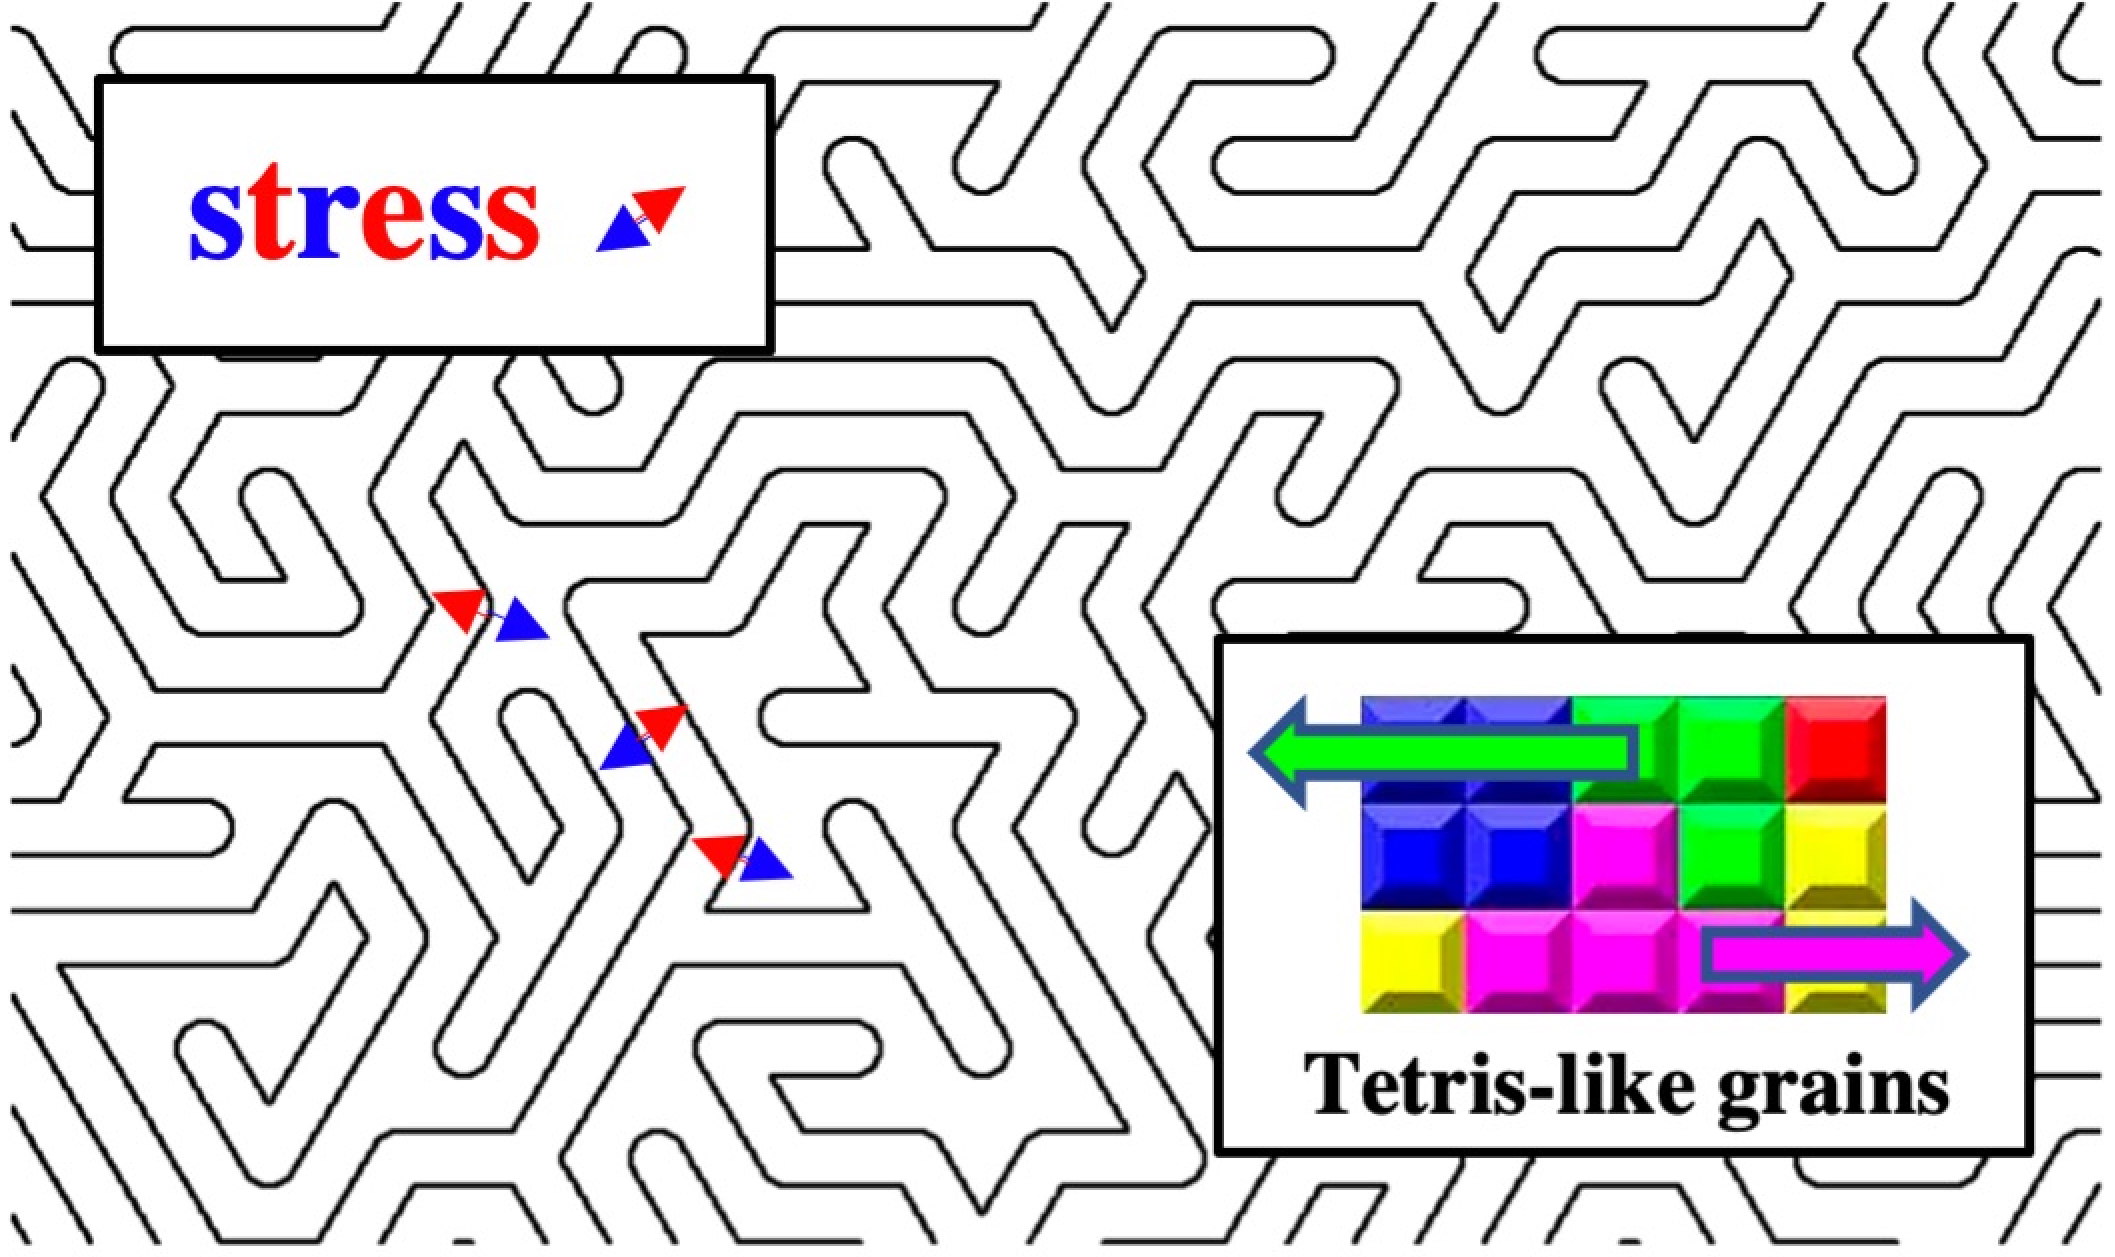 Black and white maze-like image with blue and red arrows pointing in opposite directions here and there